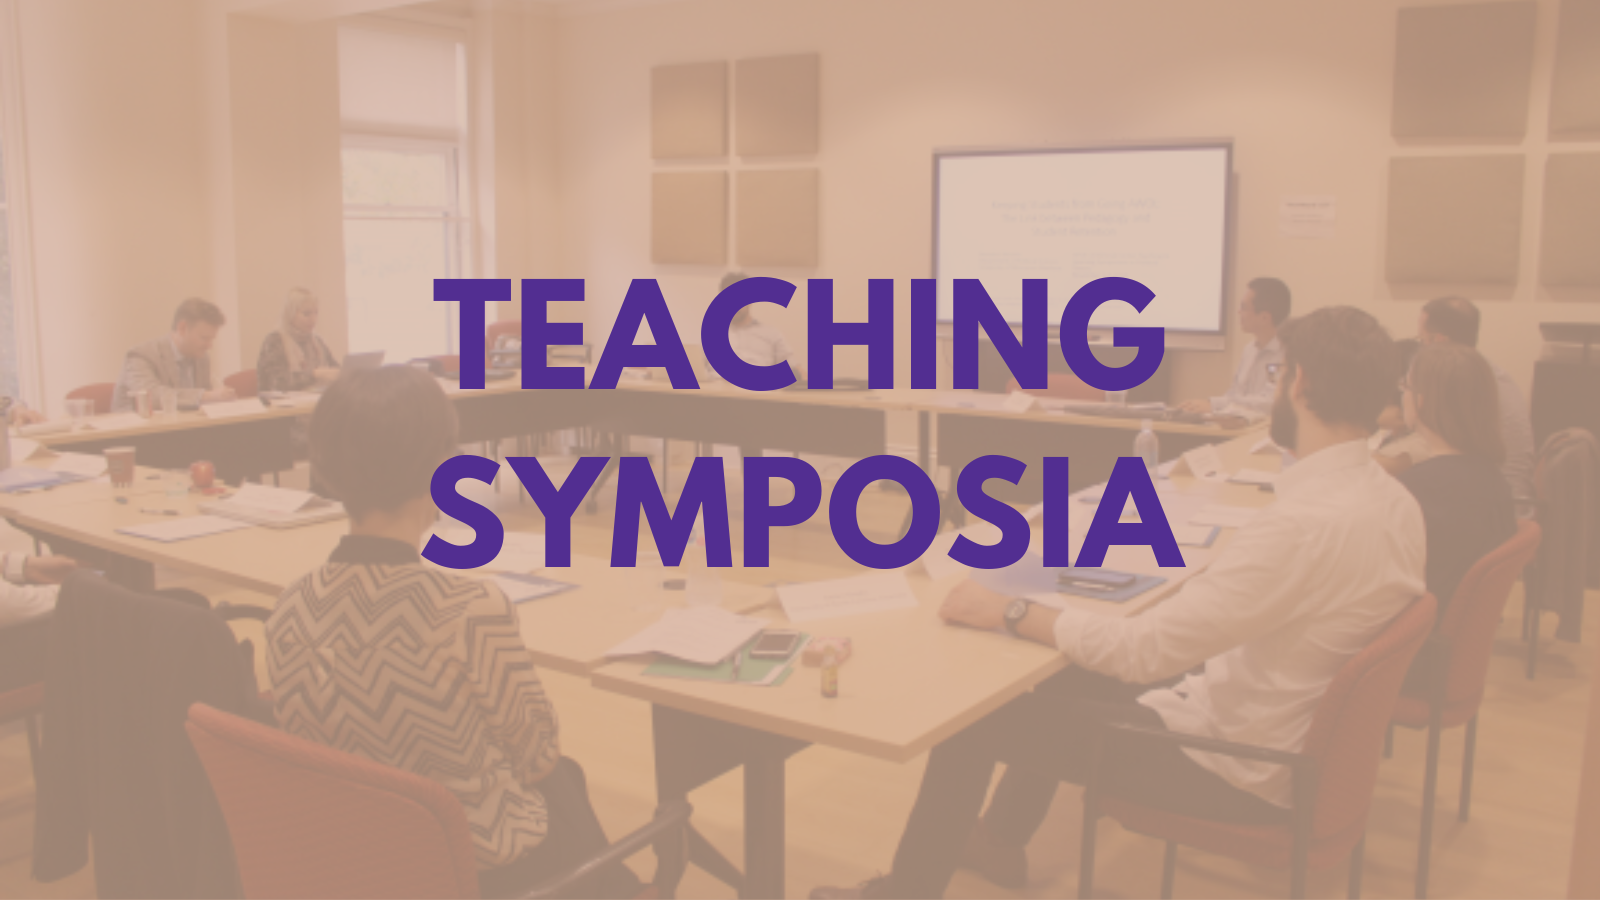 link to our teaching symposia landing page